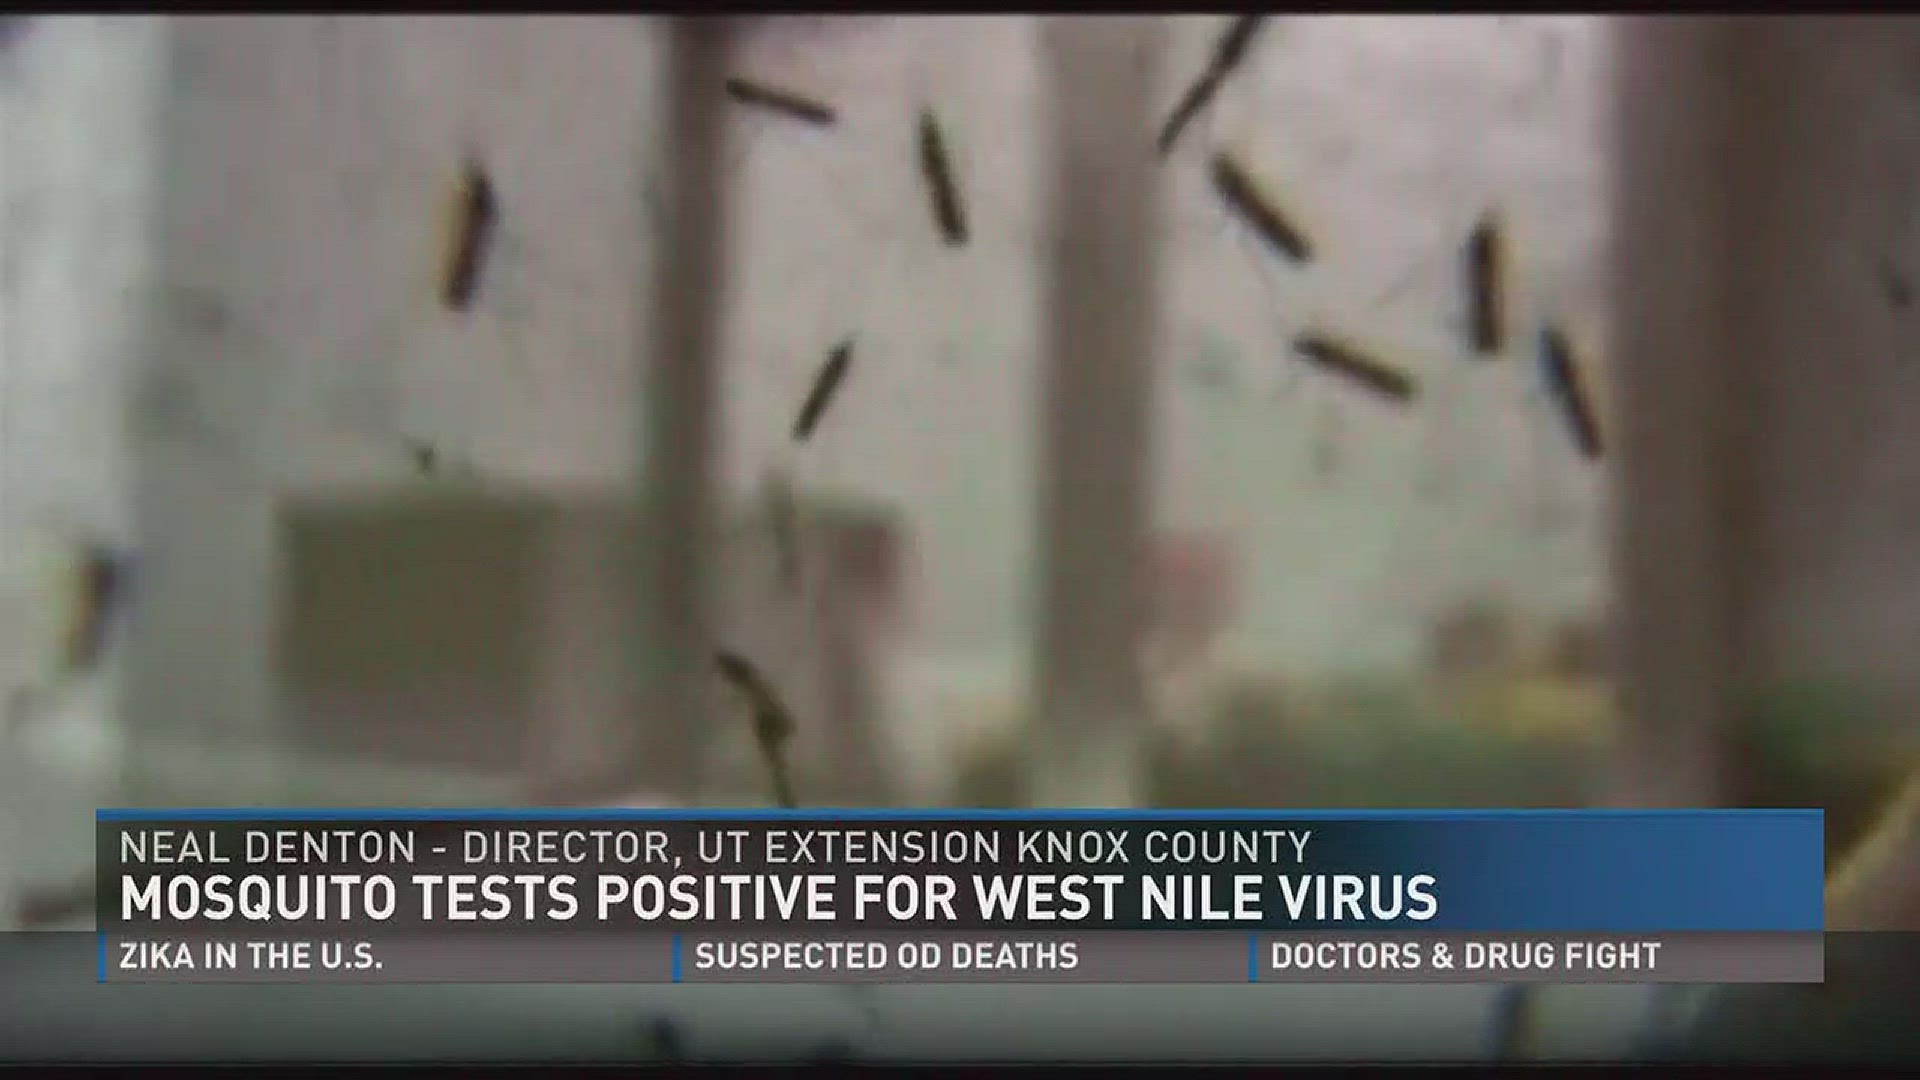 July 25, 2017: For the first time this year, a mosquito in the Knoxville area tested positive for the West Nile Virus.